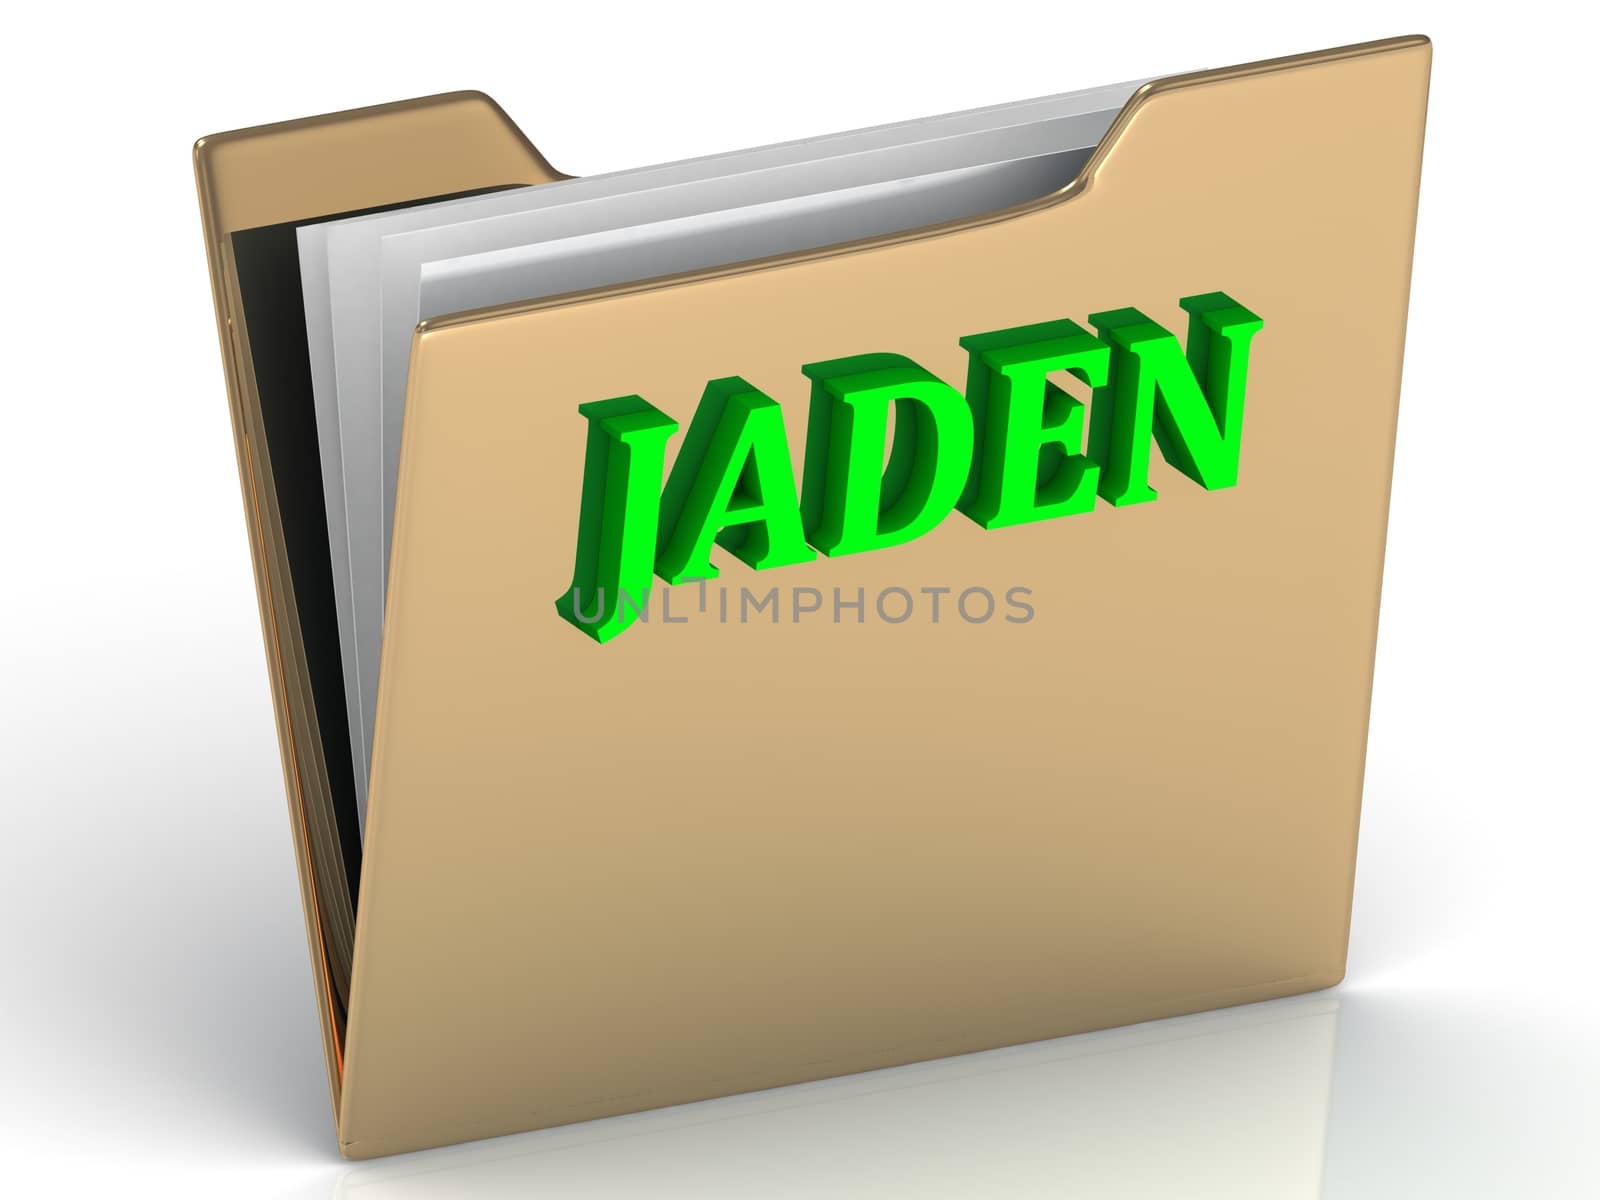 JADEN- Name and Family bright letters on gold folder on a white backgJADEN- bright green letters on gold paperwork folder on a white backgroundround